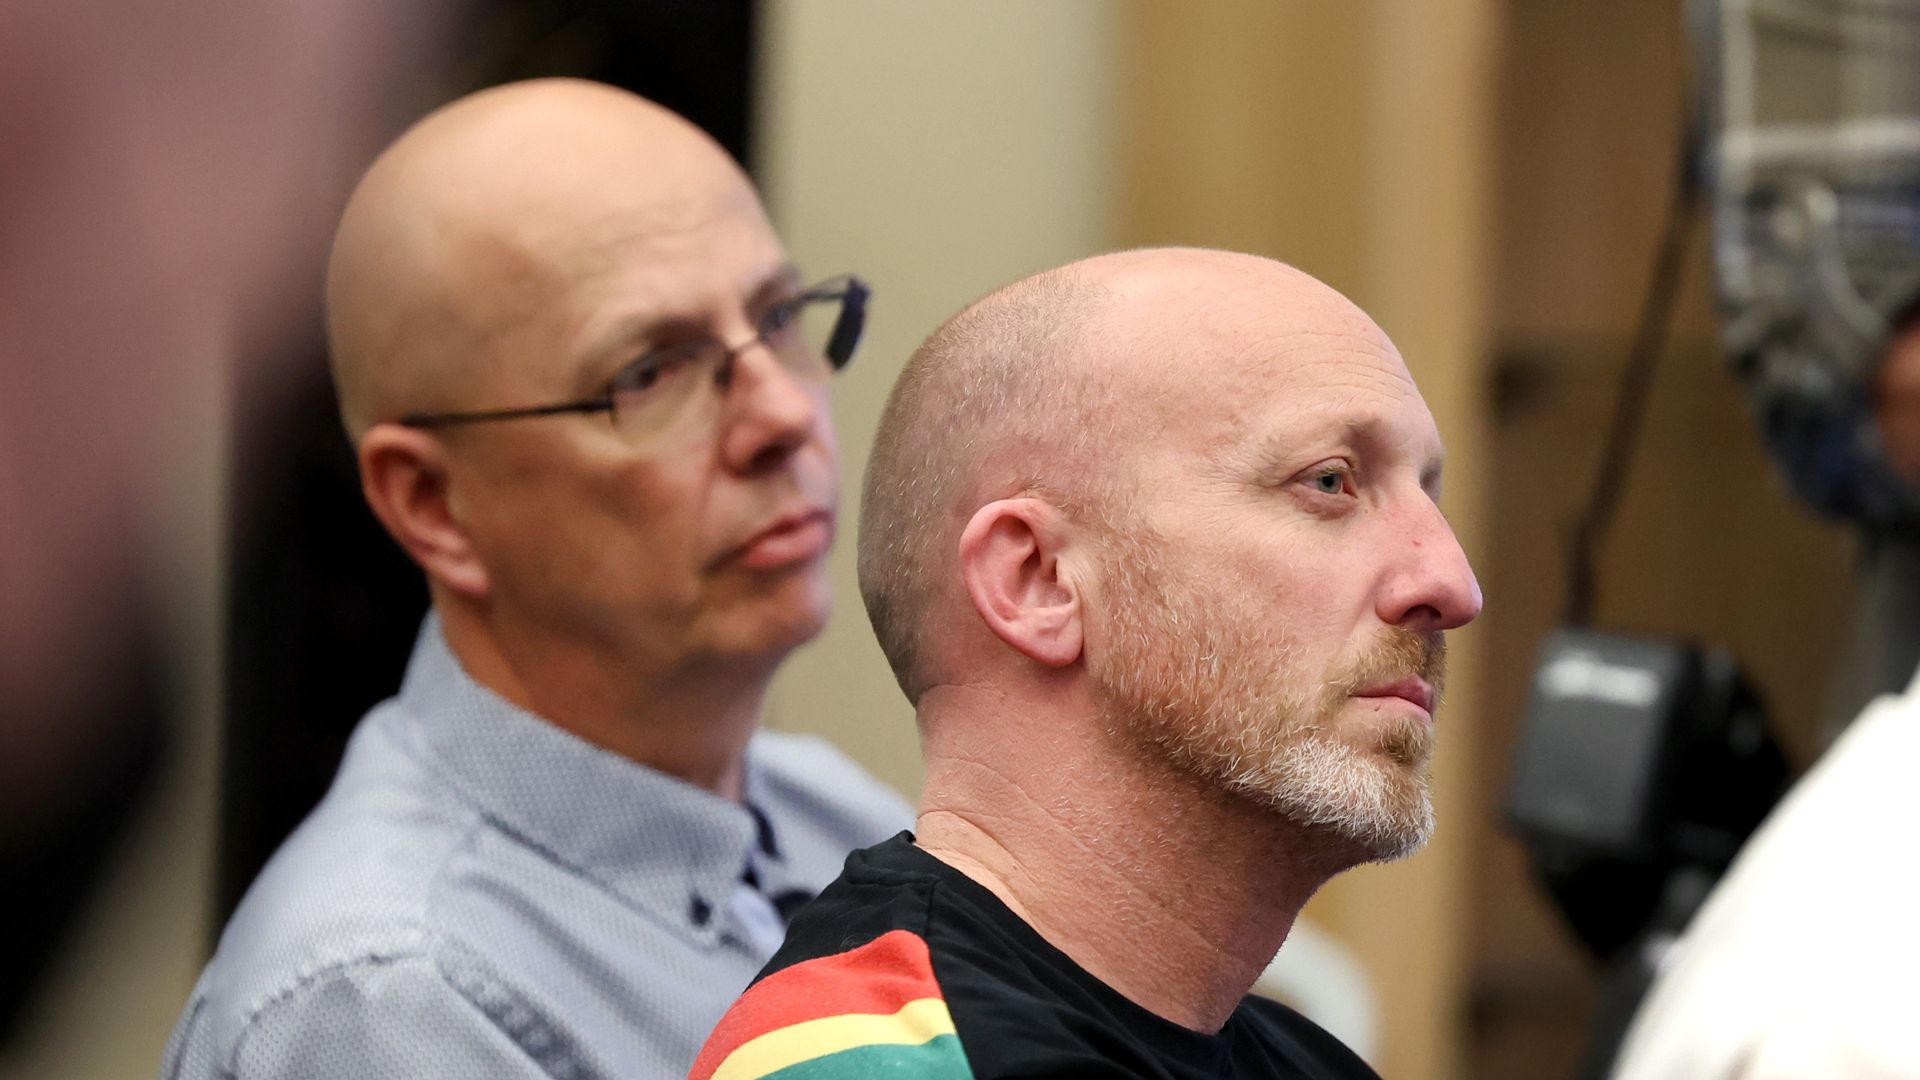 Club Q co-owners Nic Grzecka (R) and Matthew Haynes listen to speakers during a press conference at the Police Operations Center on November 21, 2022 in Colorado Springs, Colorado. 